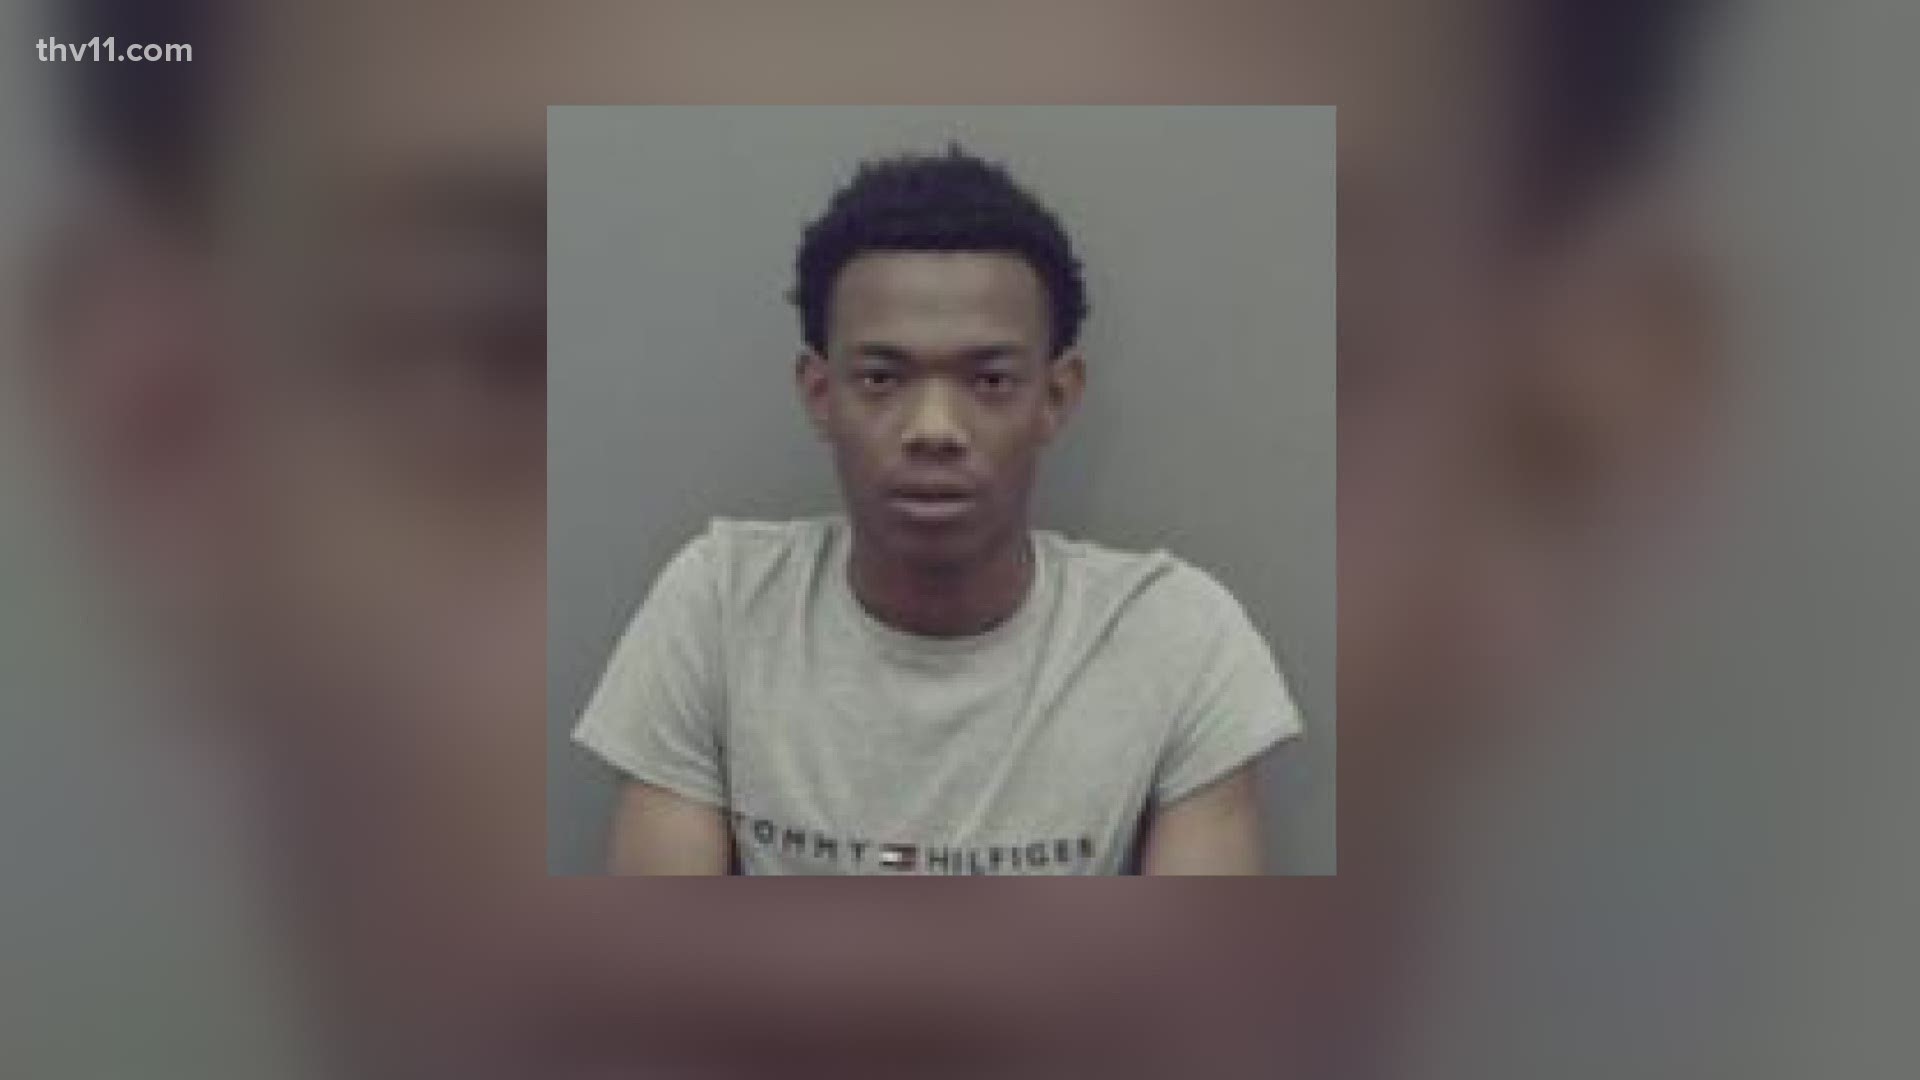 police are still looking for the second suspect, 16-year-old Keundre Parker, for the same murder.